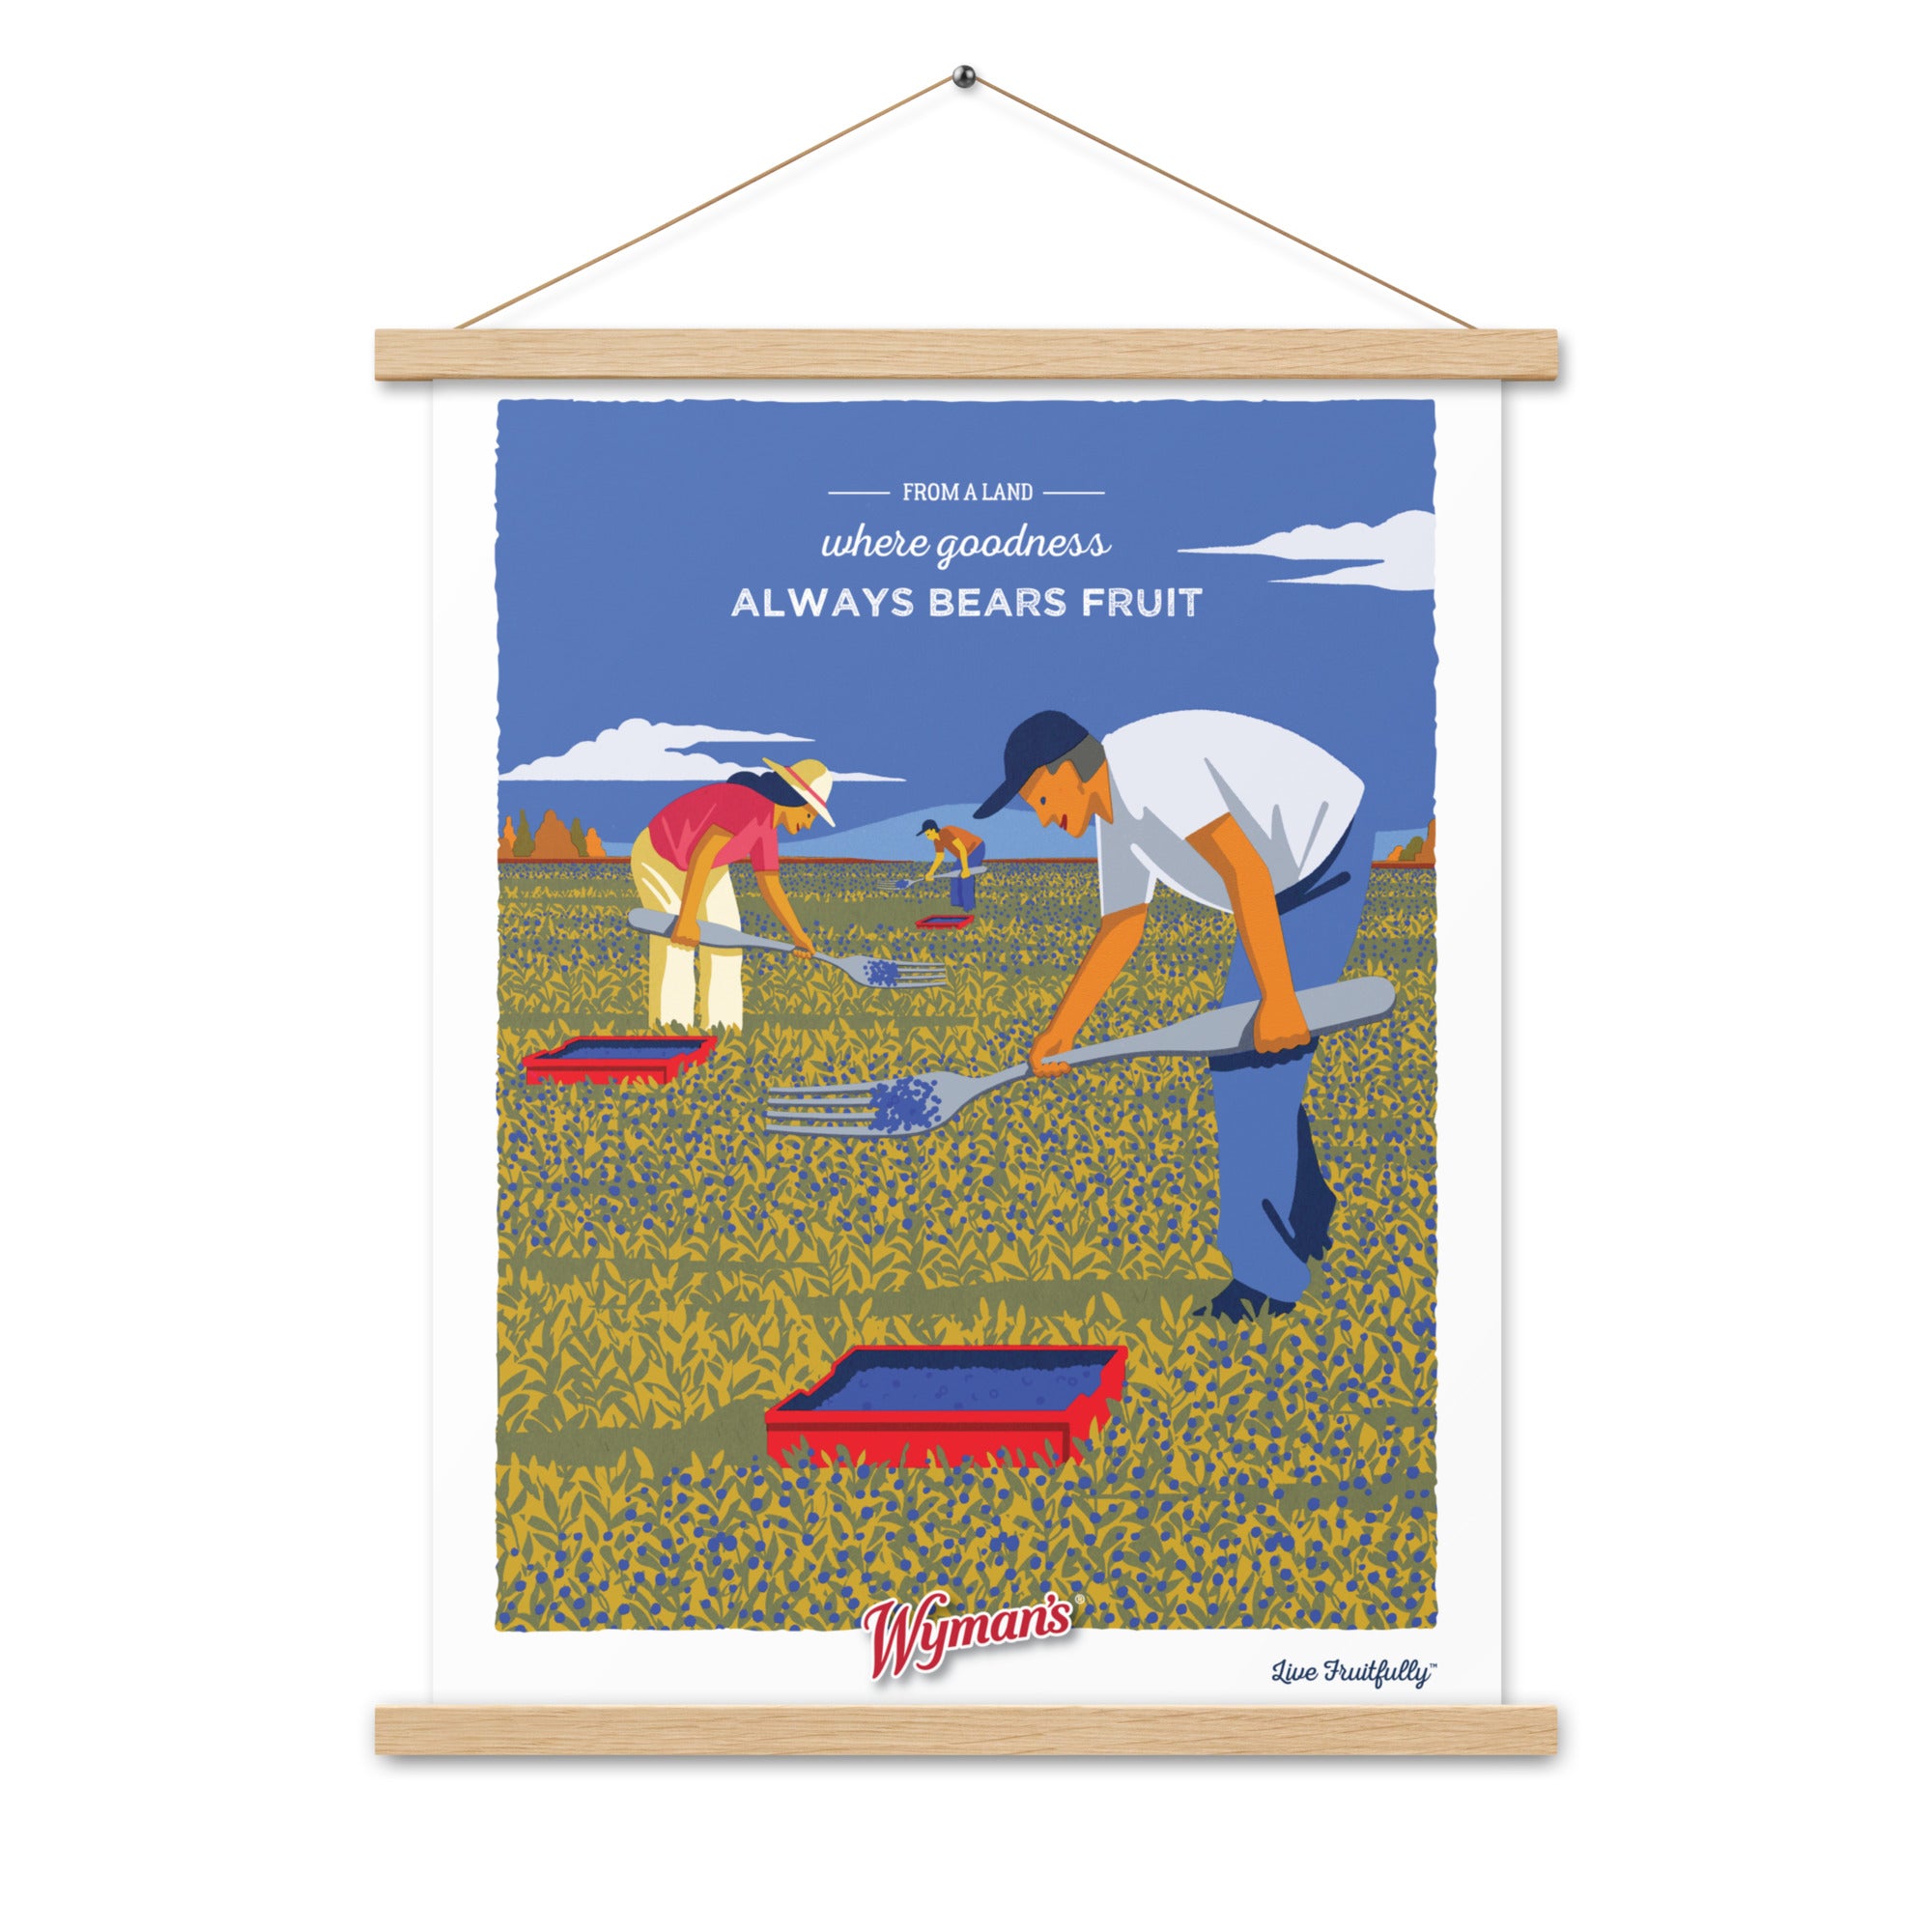 A Shop Wyman's "From a Land Where Goodness Always Bears Fruit" poster with a picture of a man and a woman picking blueberries in a field.